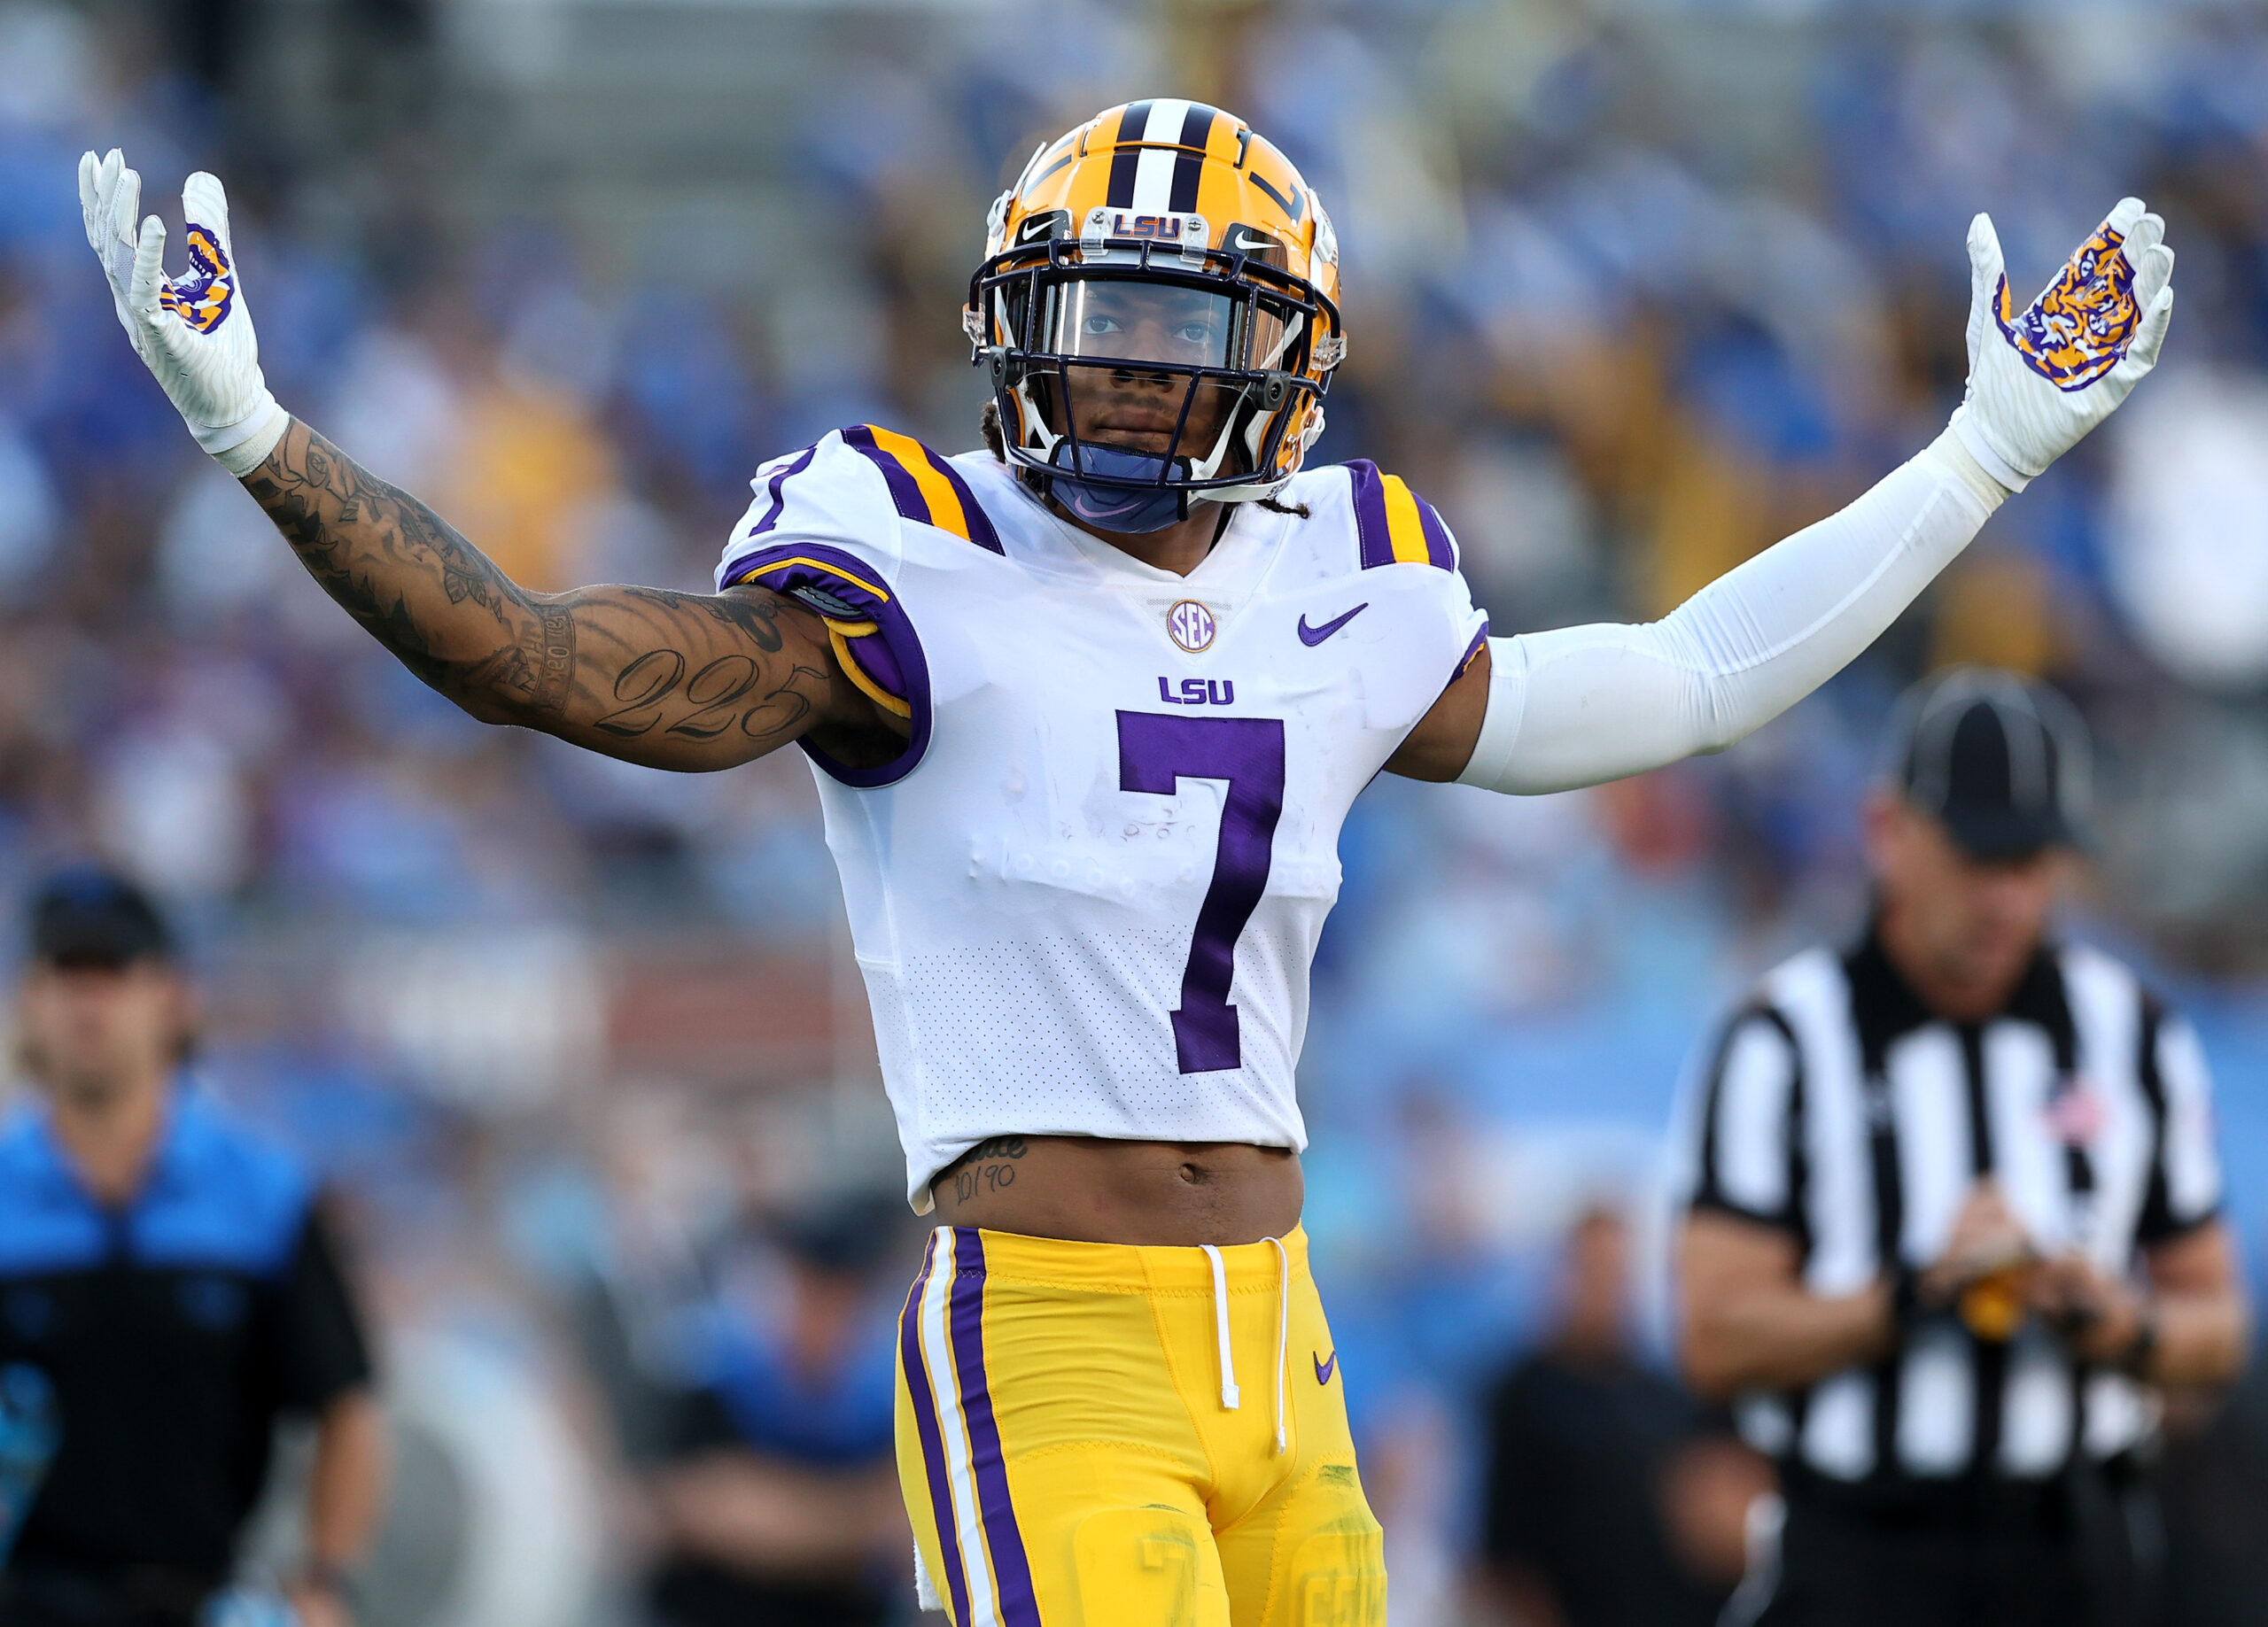 Eagles’ DB coach in attendance at LSU’s pro day to get an up-close look at CB Derek Stingley Jr.